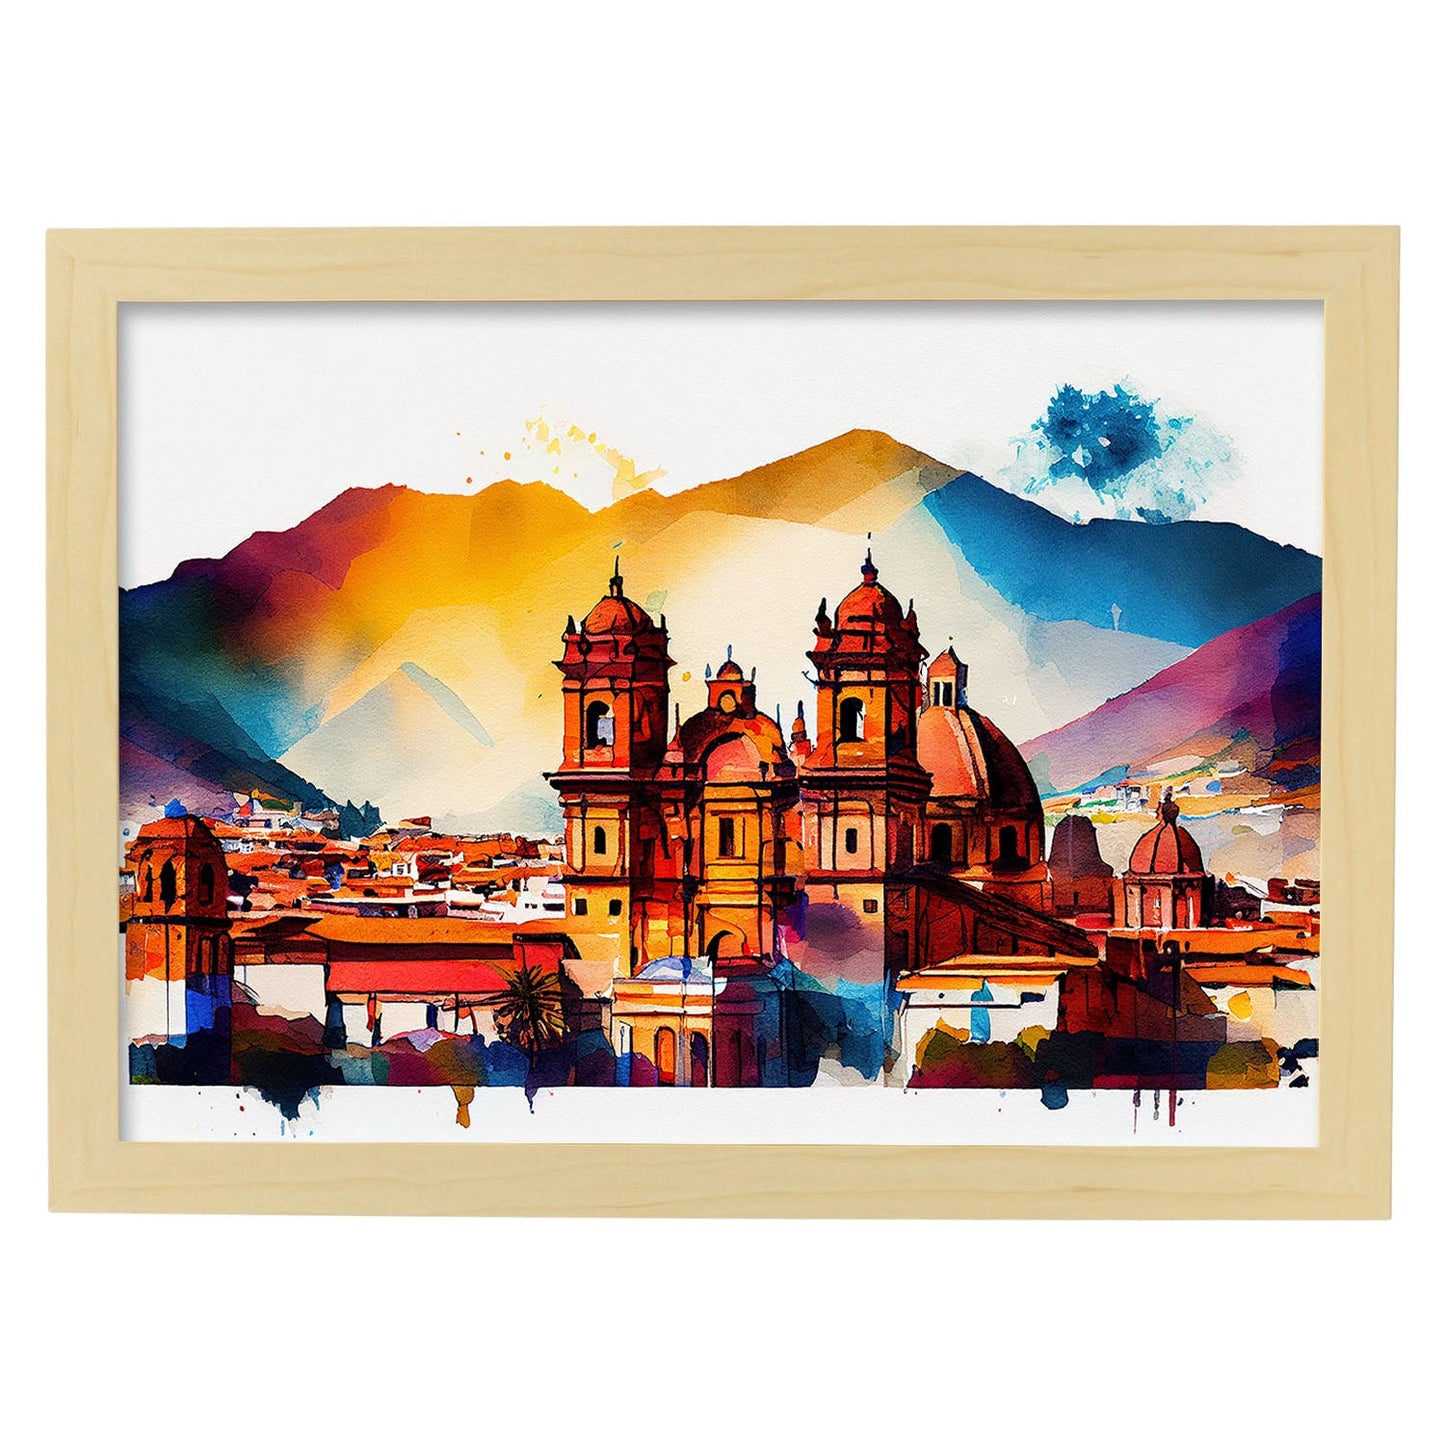 Nacnic watercolor of a skyline of the city of Cusco. Aesthetic Wall Art Prints for Bedroom or Living Room Design.-Artwork-Nacnic-A4-Marco Madera Clara-Nacnic Estudio SL